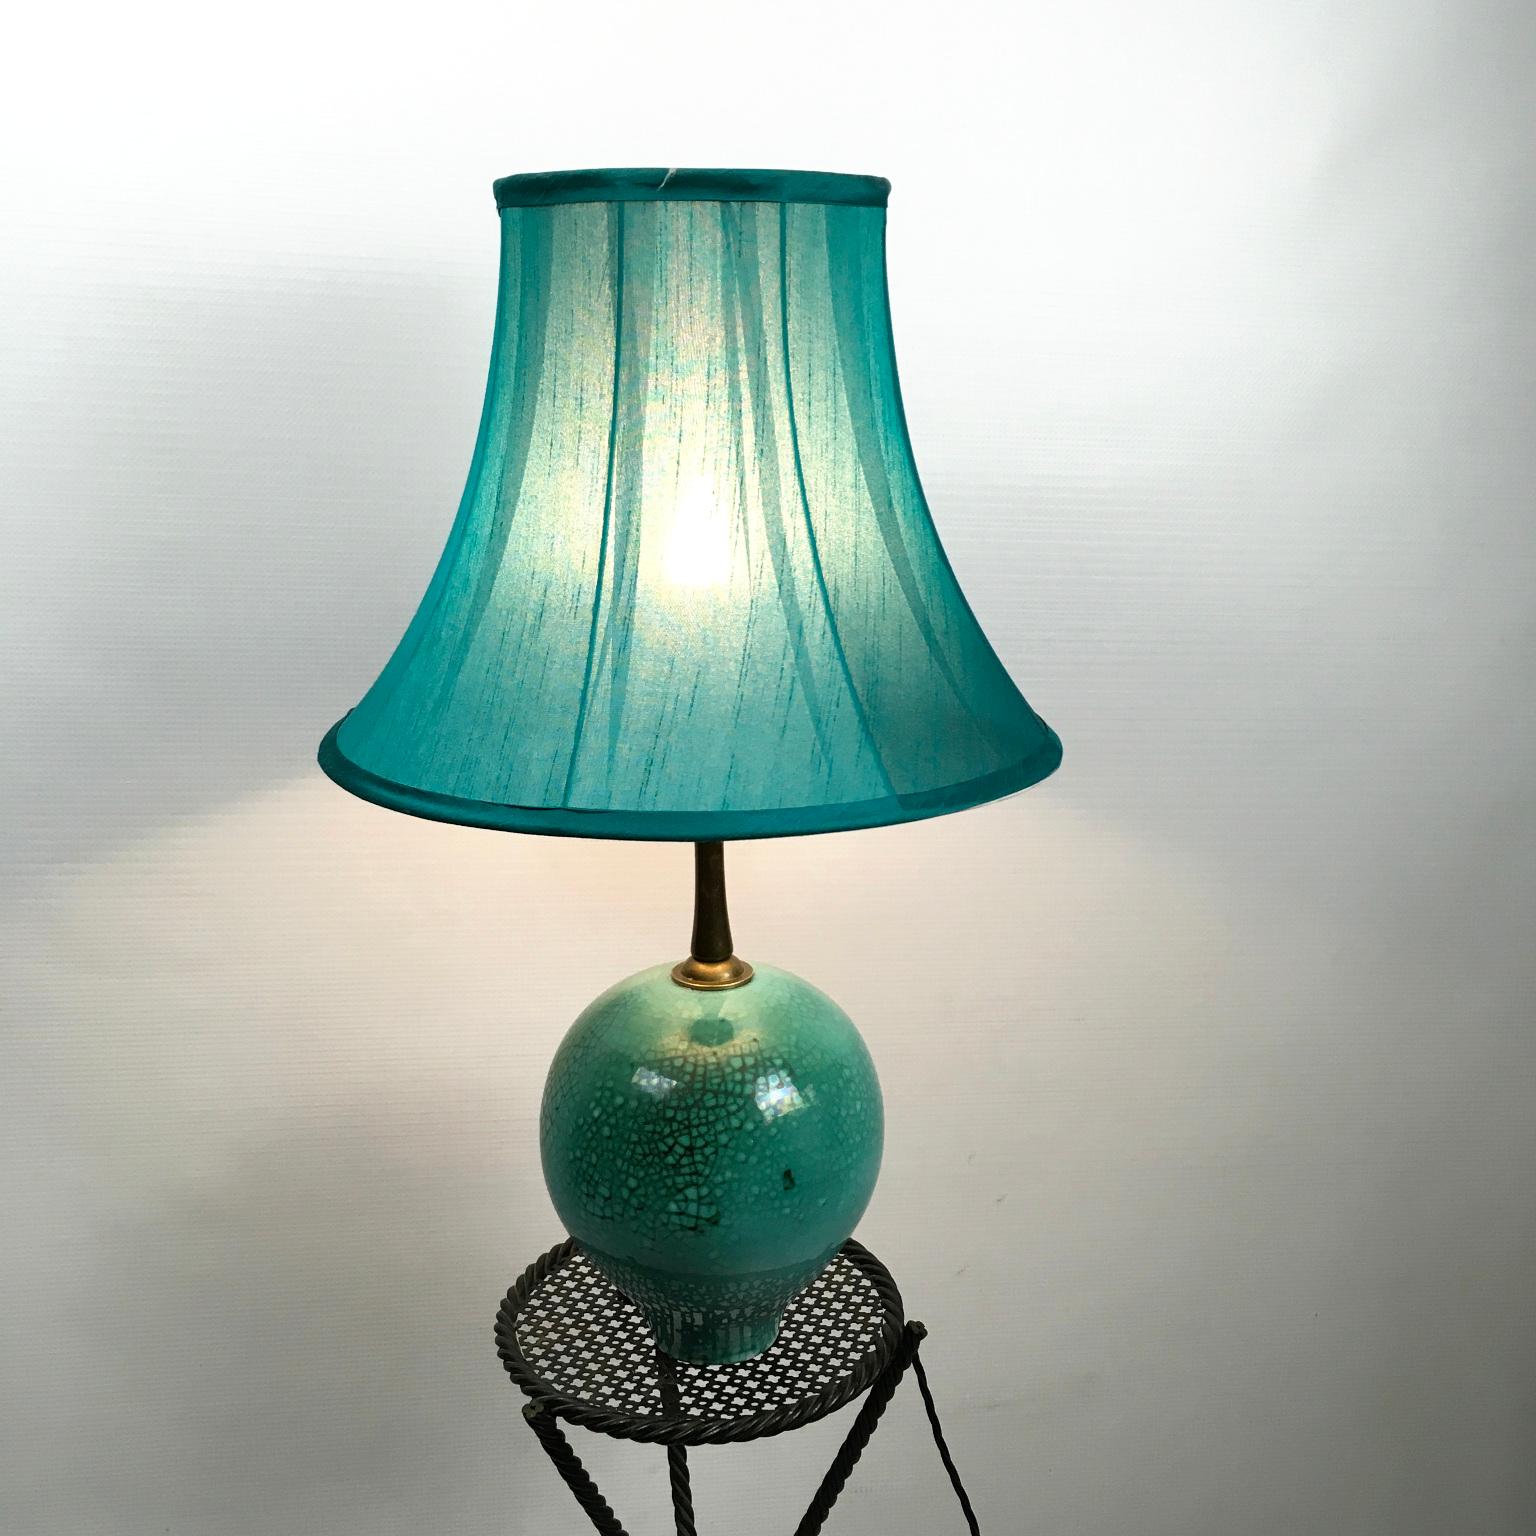 1930s Primavera Green Glazed and Cracked Ceramic Table Lamp For Sale 2